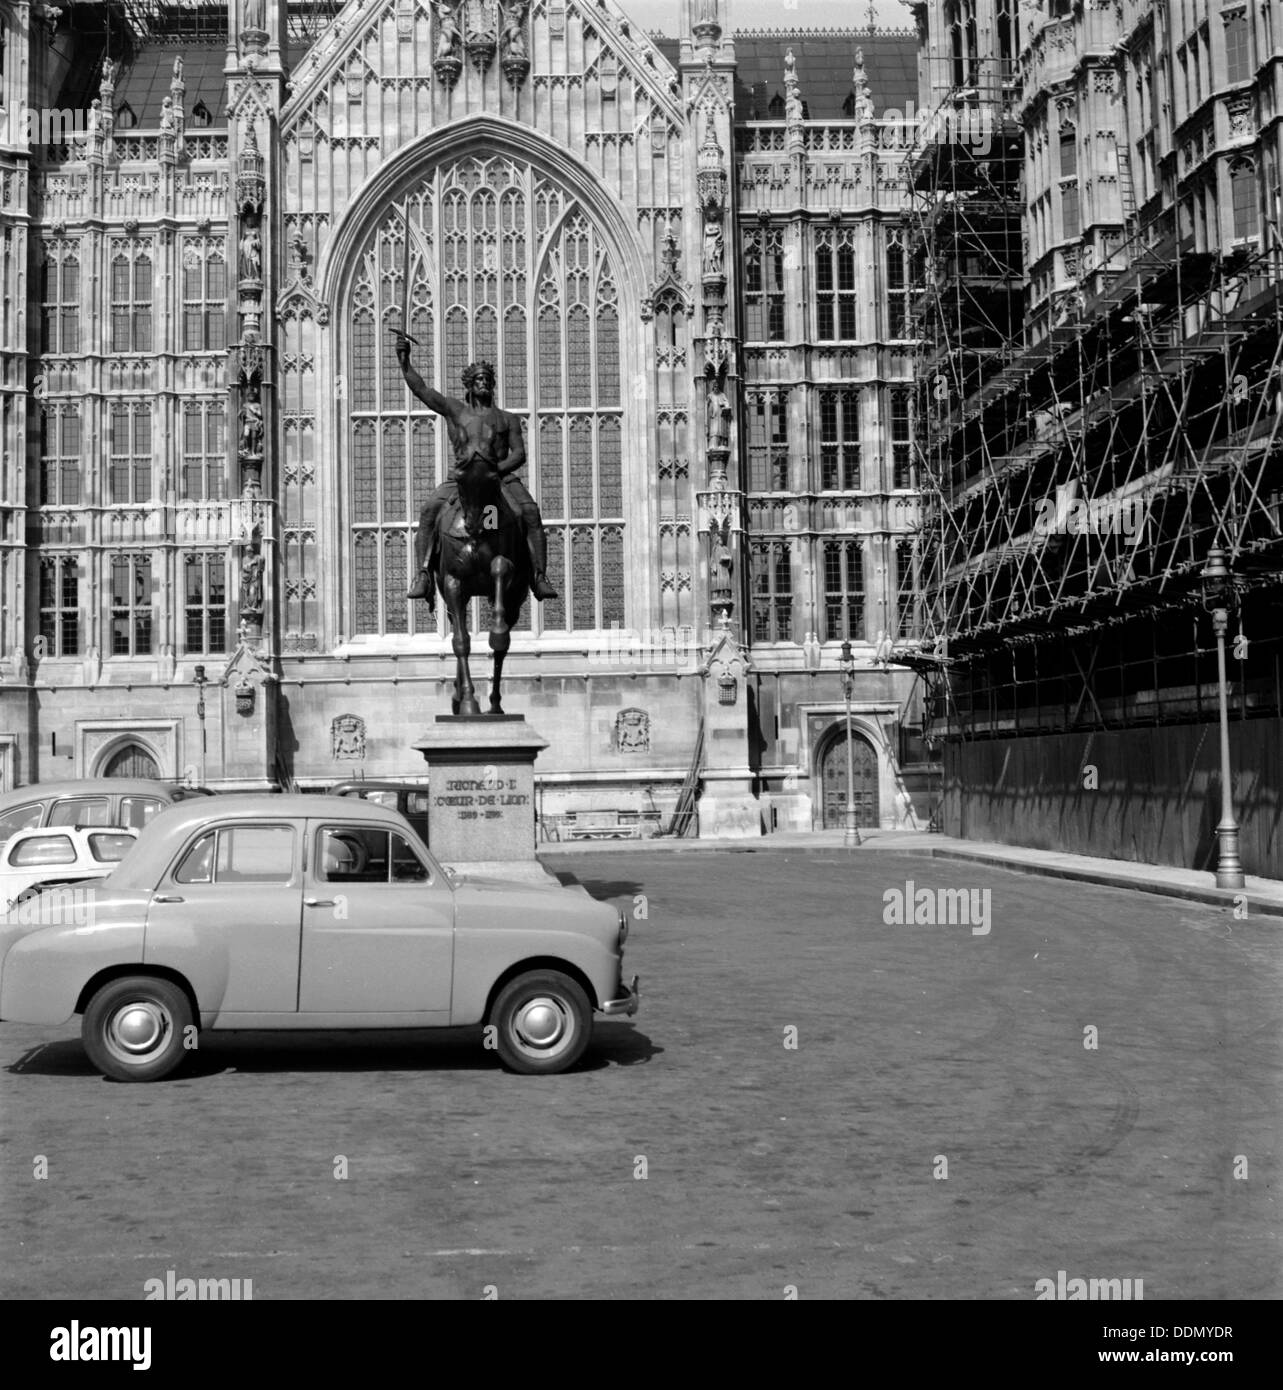 Richard Coeur de Lion and a 'Baby Austin' in Old Palace Yard, London, c1945-c1965. Artist: SW Rawlings Stock Photo